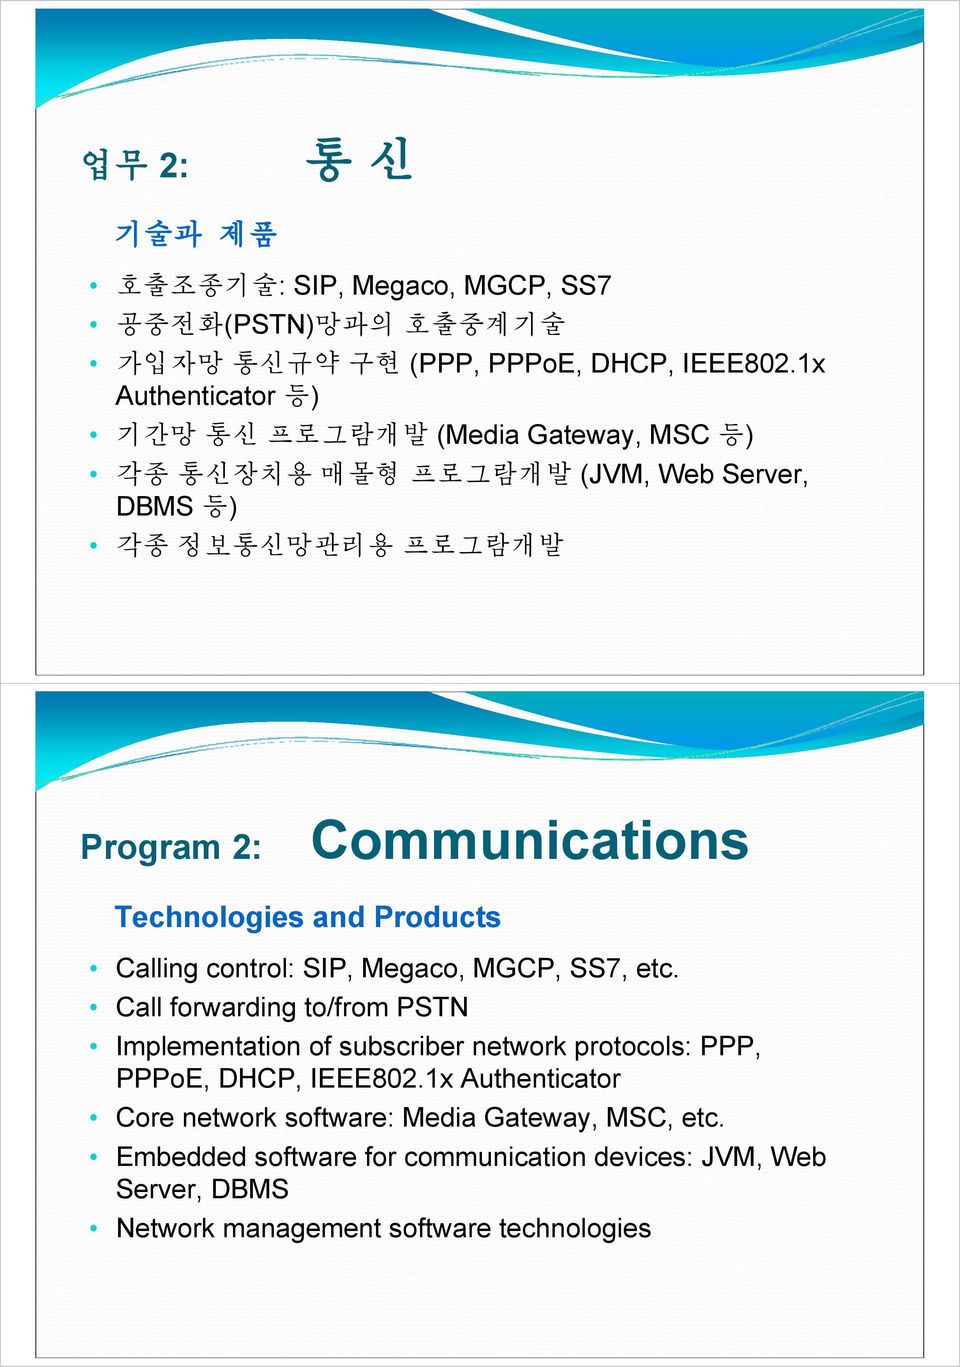 Technologies and Products Calling control: SIP, Megaco, MGCP, SS7, etc.